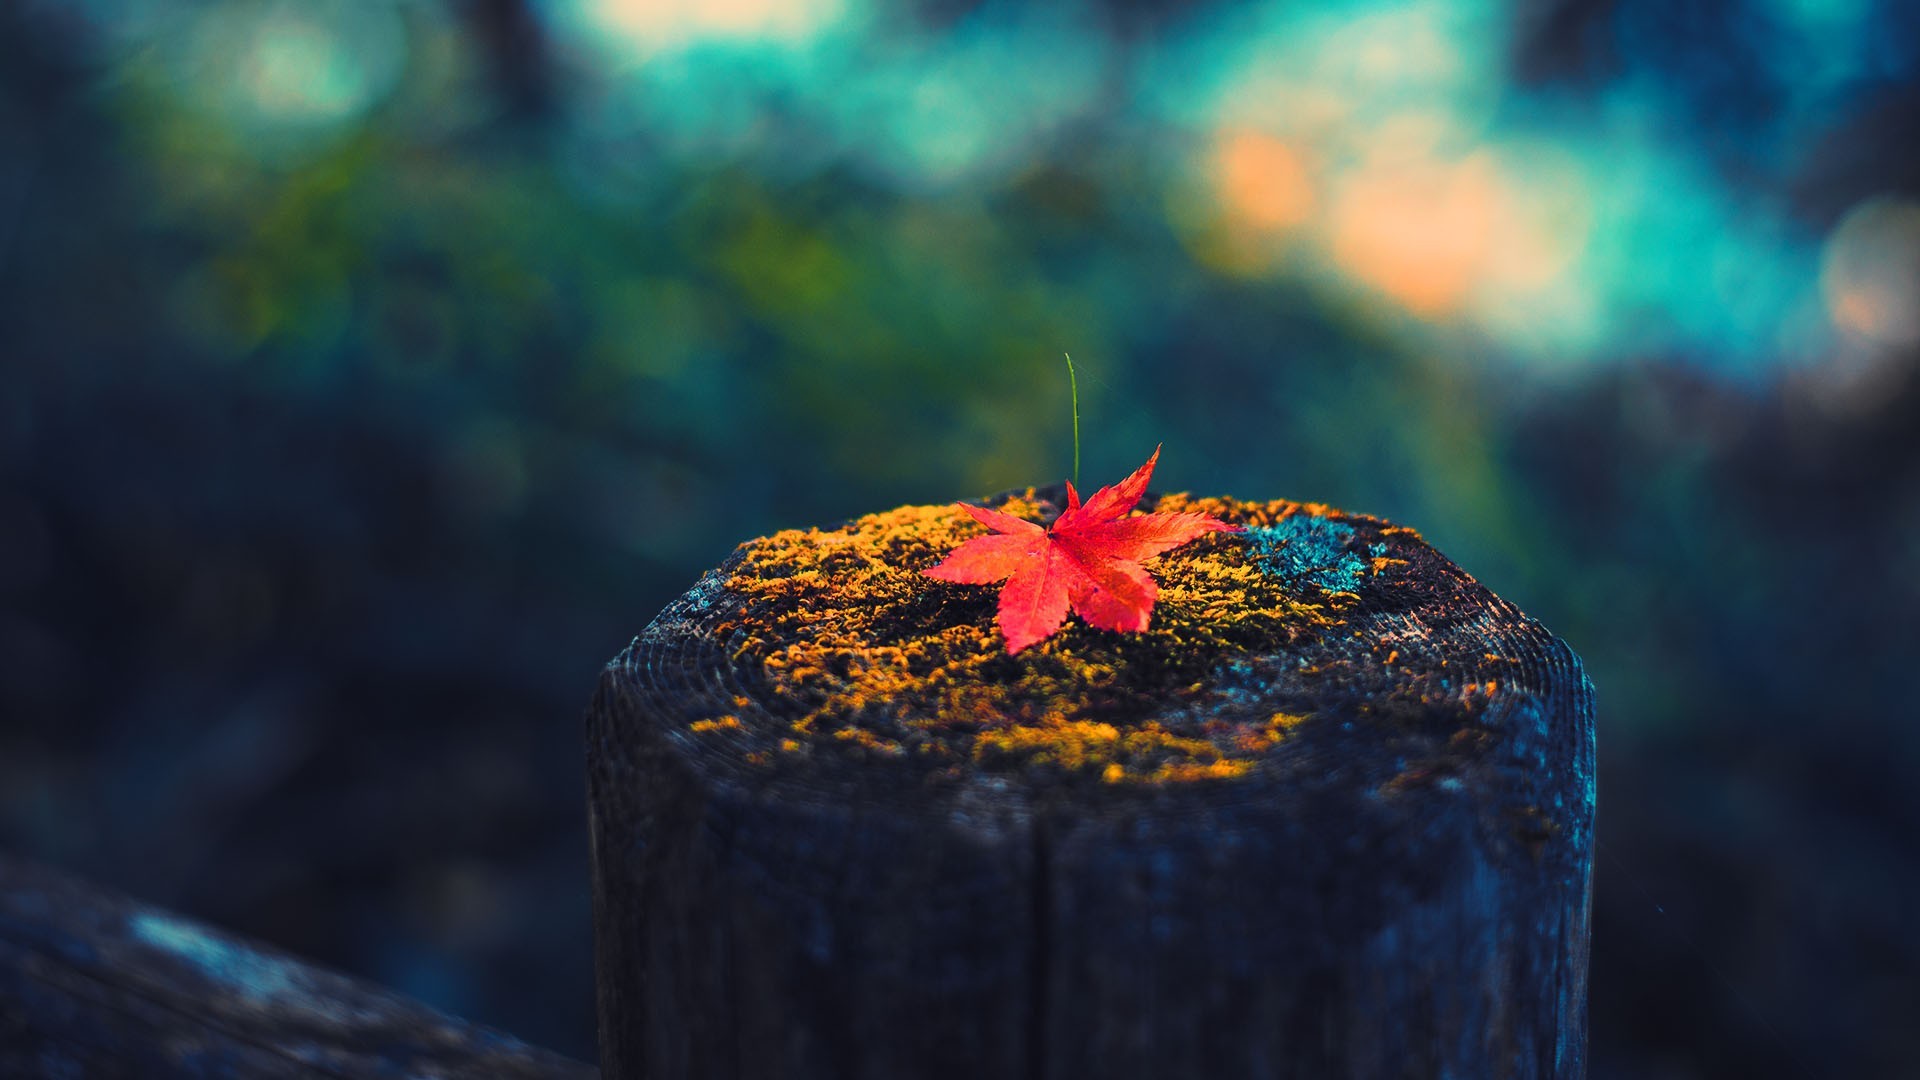 photography, Leaves, Fall, Colorful Wallpaper